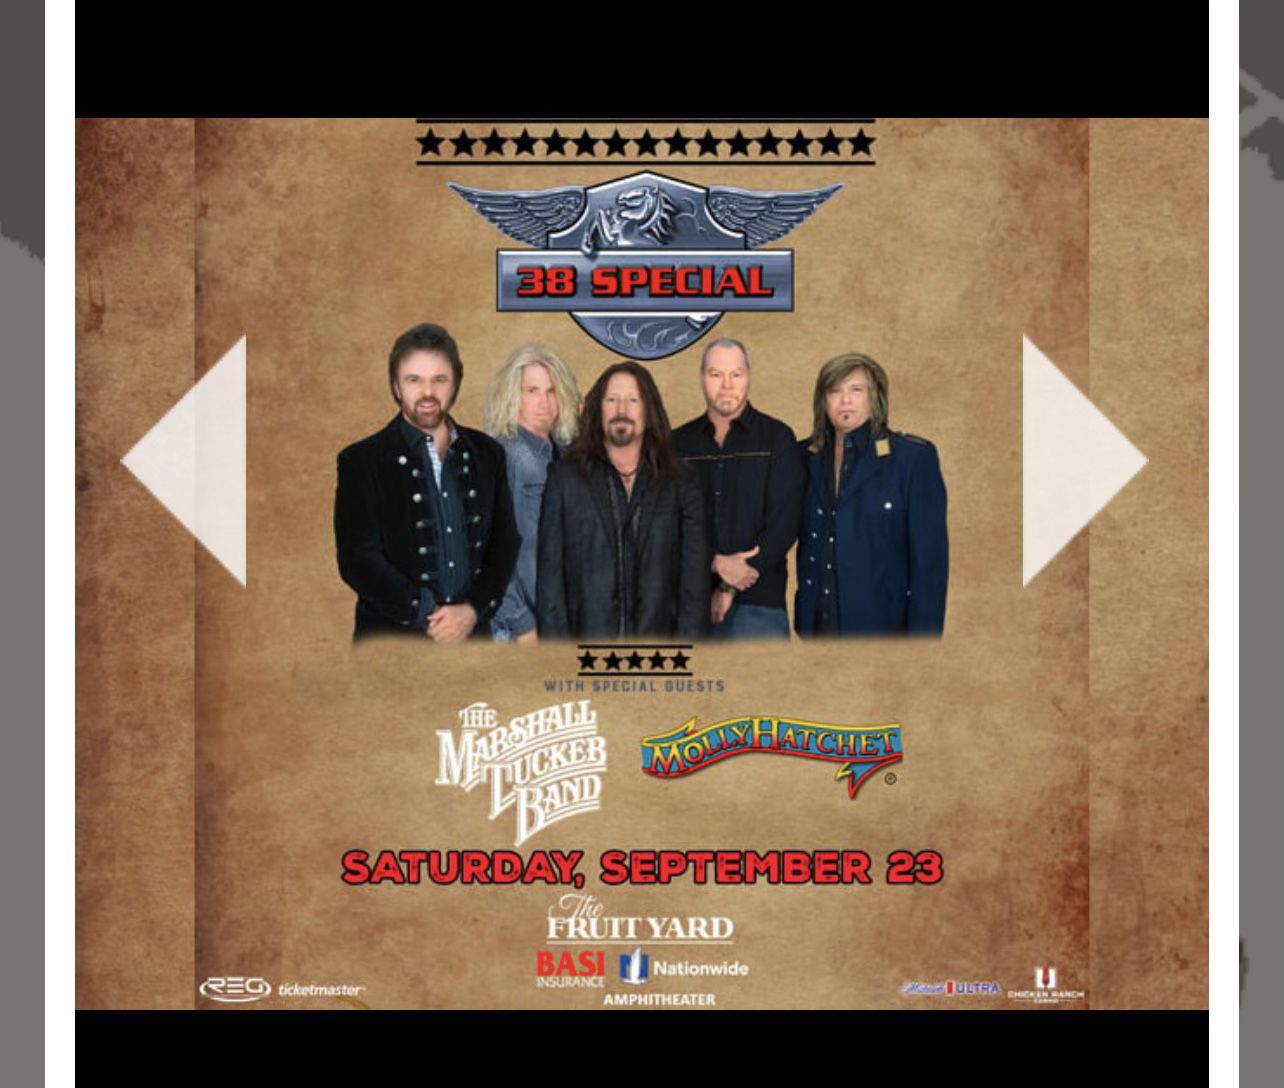 38 Special Concert Tickets